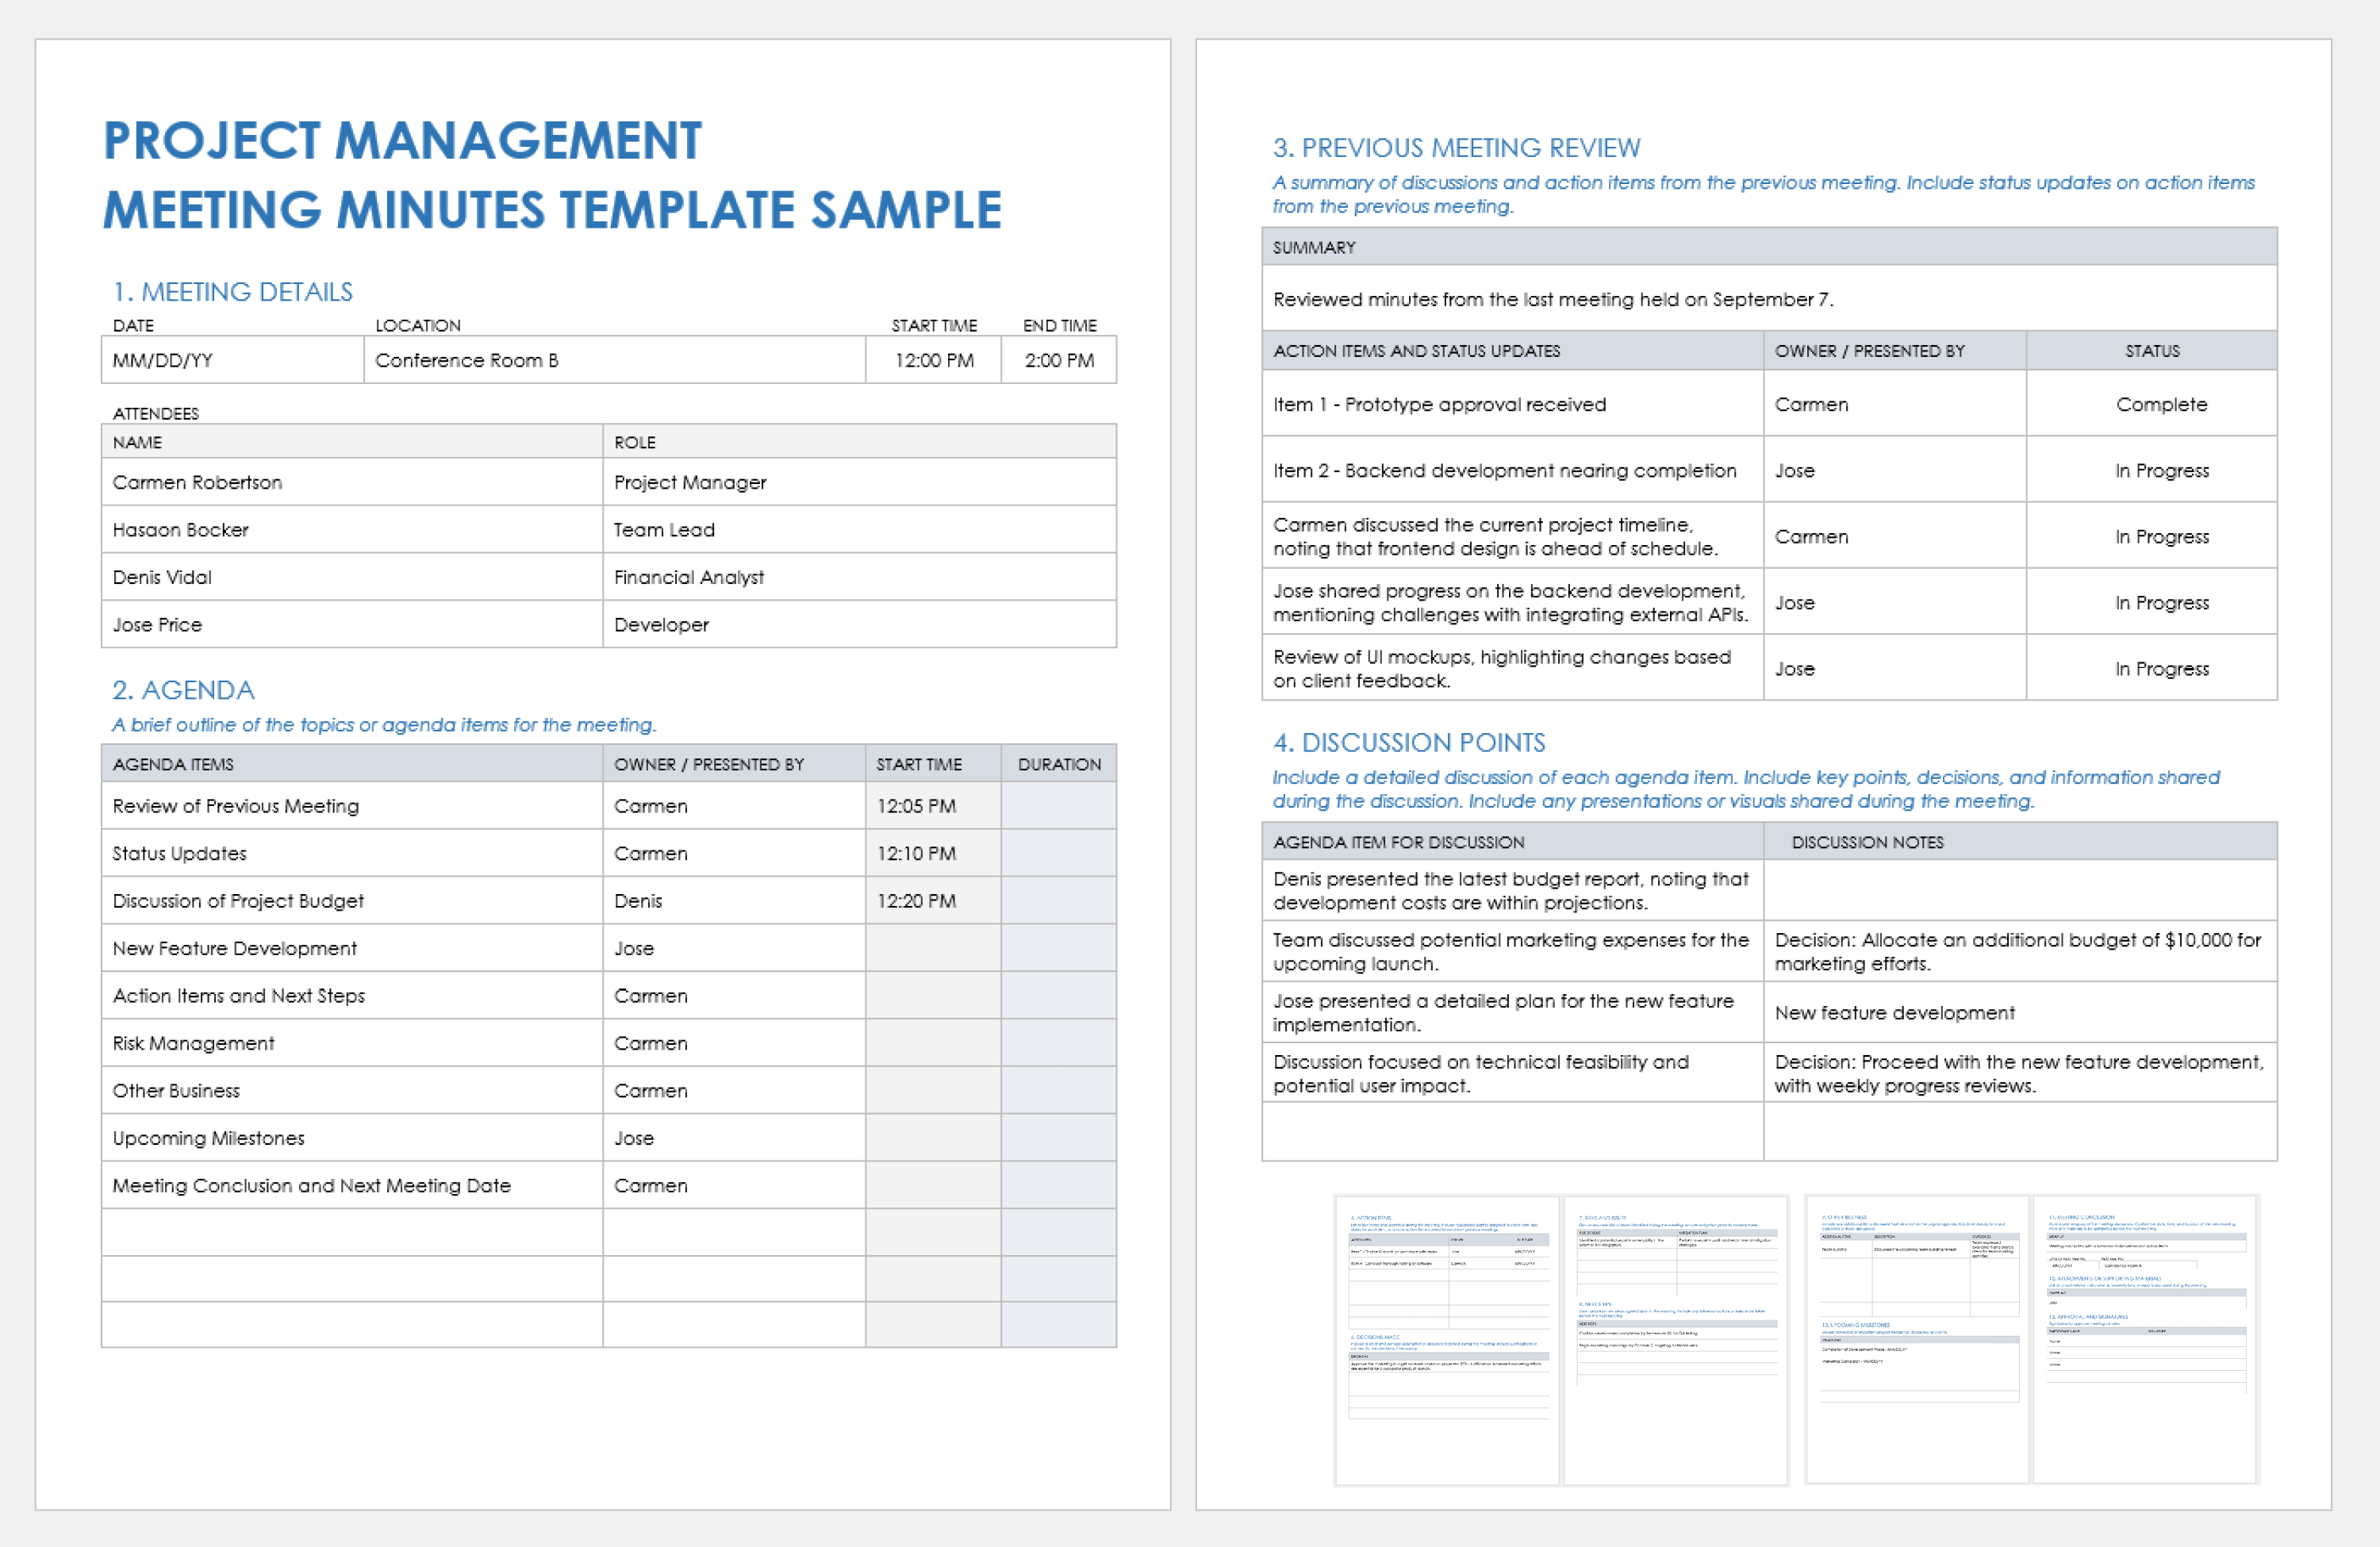 Project Management Meeting Minutes Sample Template